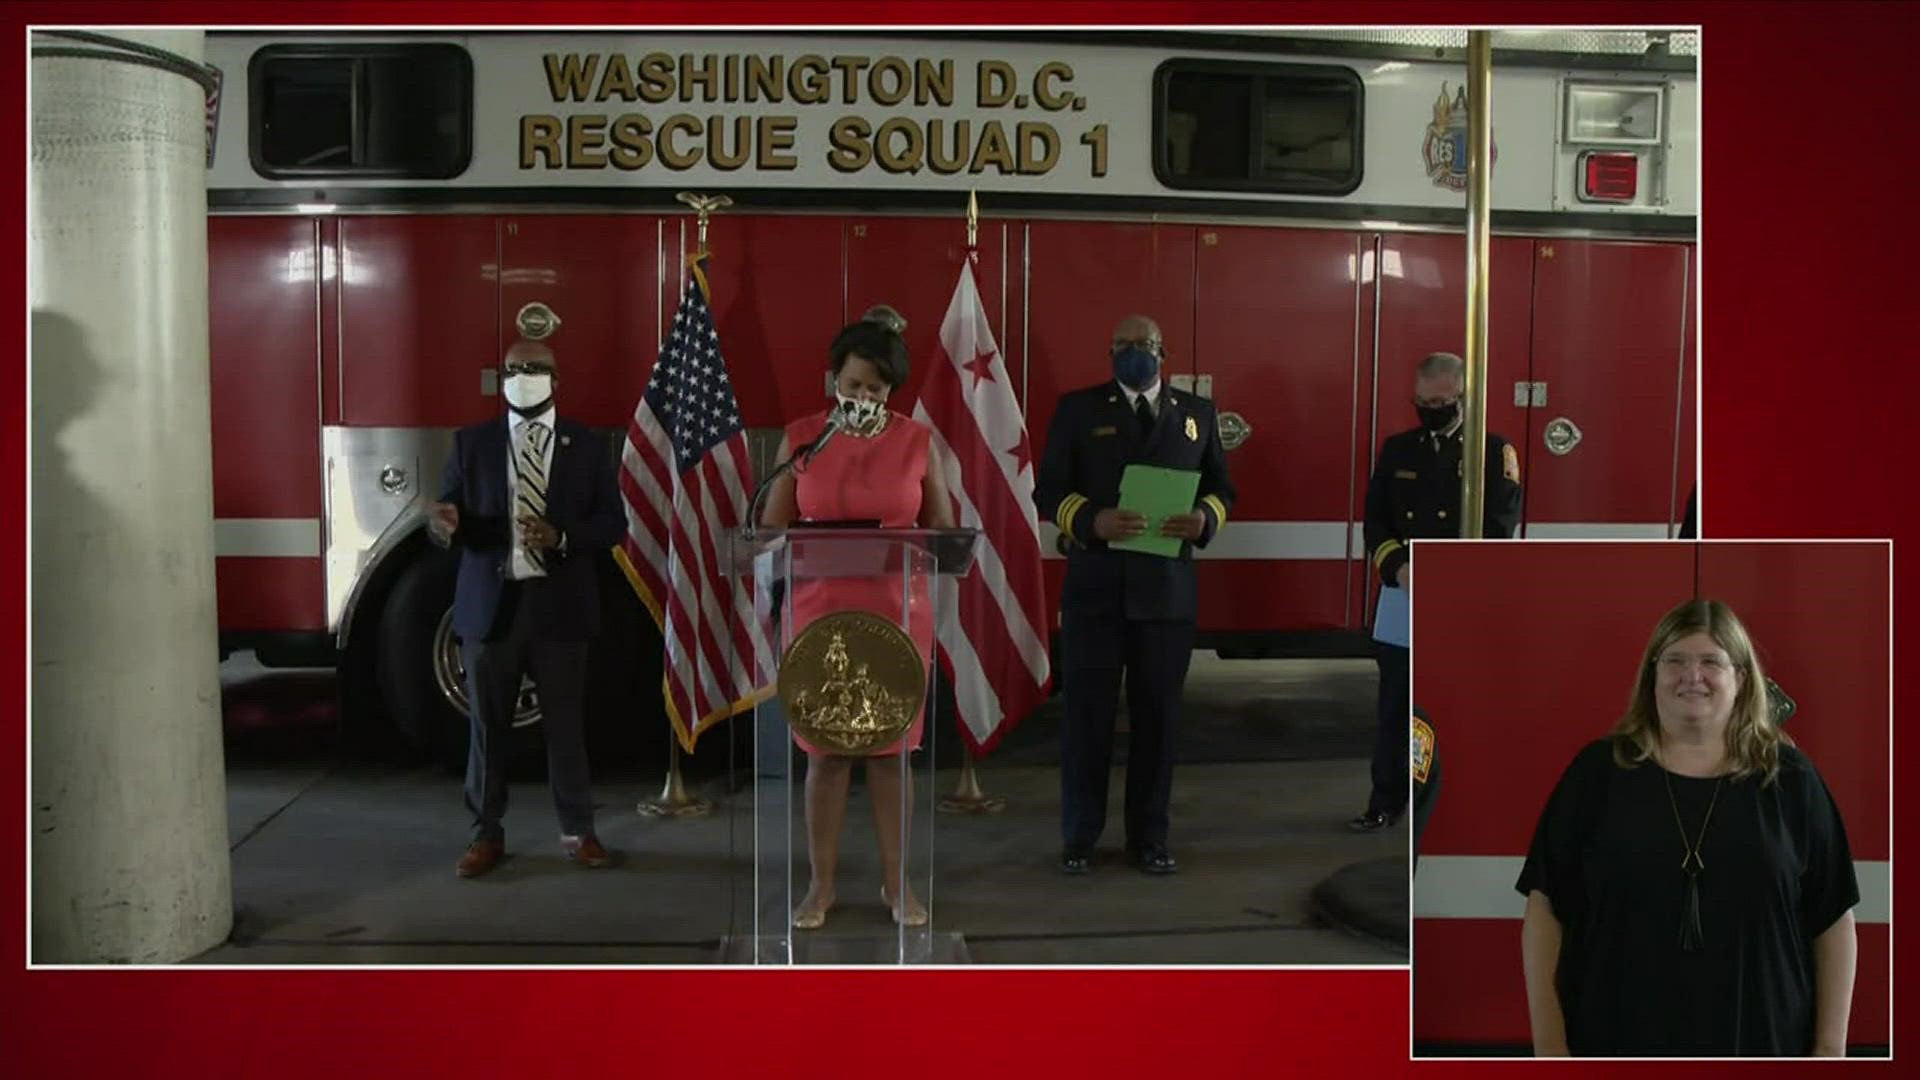 After five years as Chief of D.C. Fire and Emergency Medical Services, Gregory Dean stepped down.